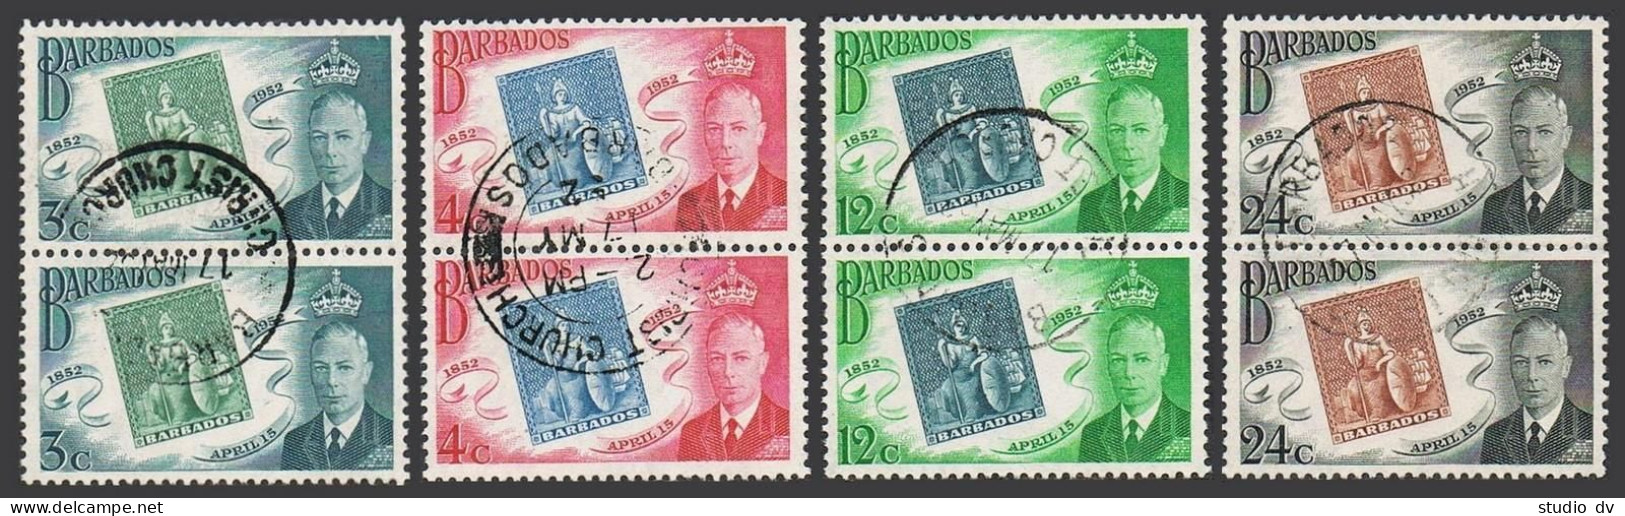 Barbados 230-233 Pairs, Used. Michel 198-201. Barbados Postage Stamps-100, 1952. - Barbades (1966-...)